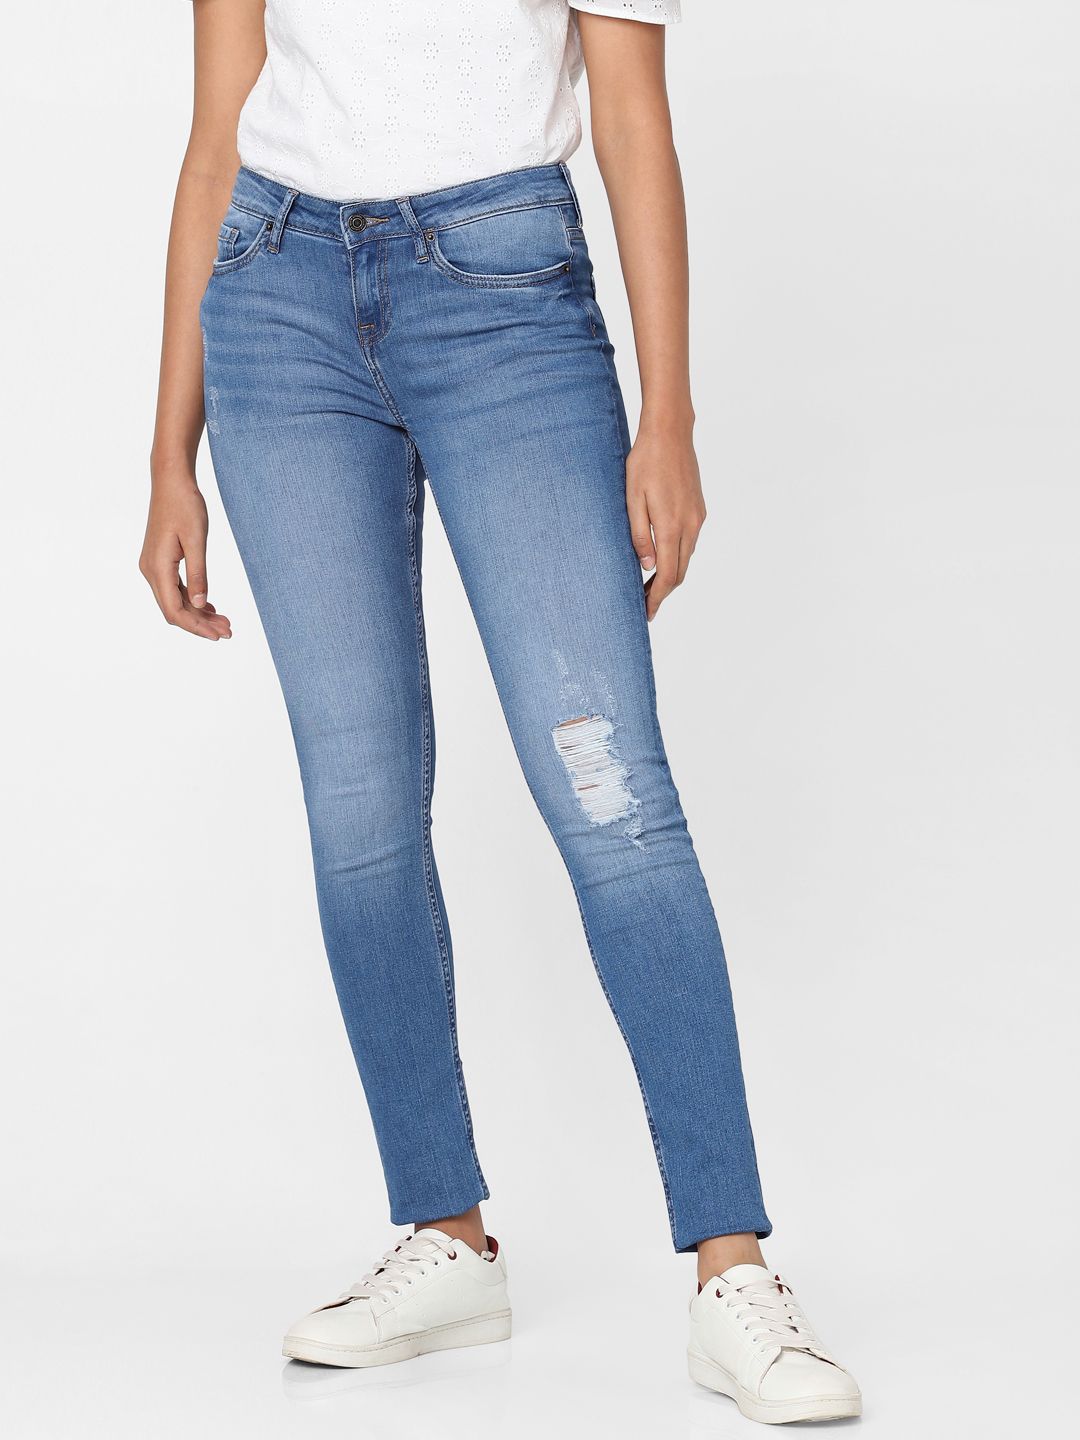 Vero Moda Women Blue Skinny Fit Low Distress Heavy Fade Stretchable Jeans Price in India